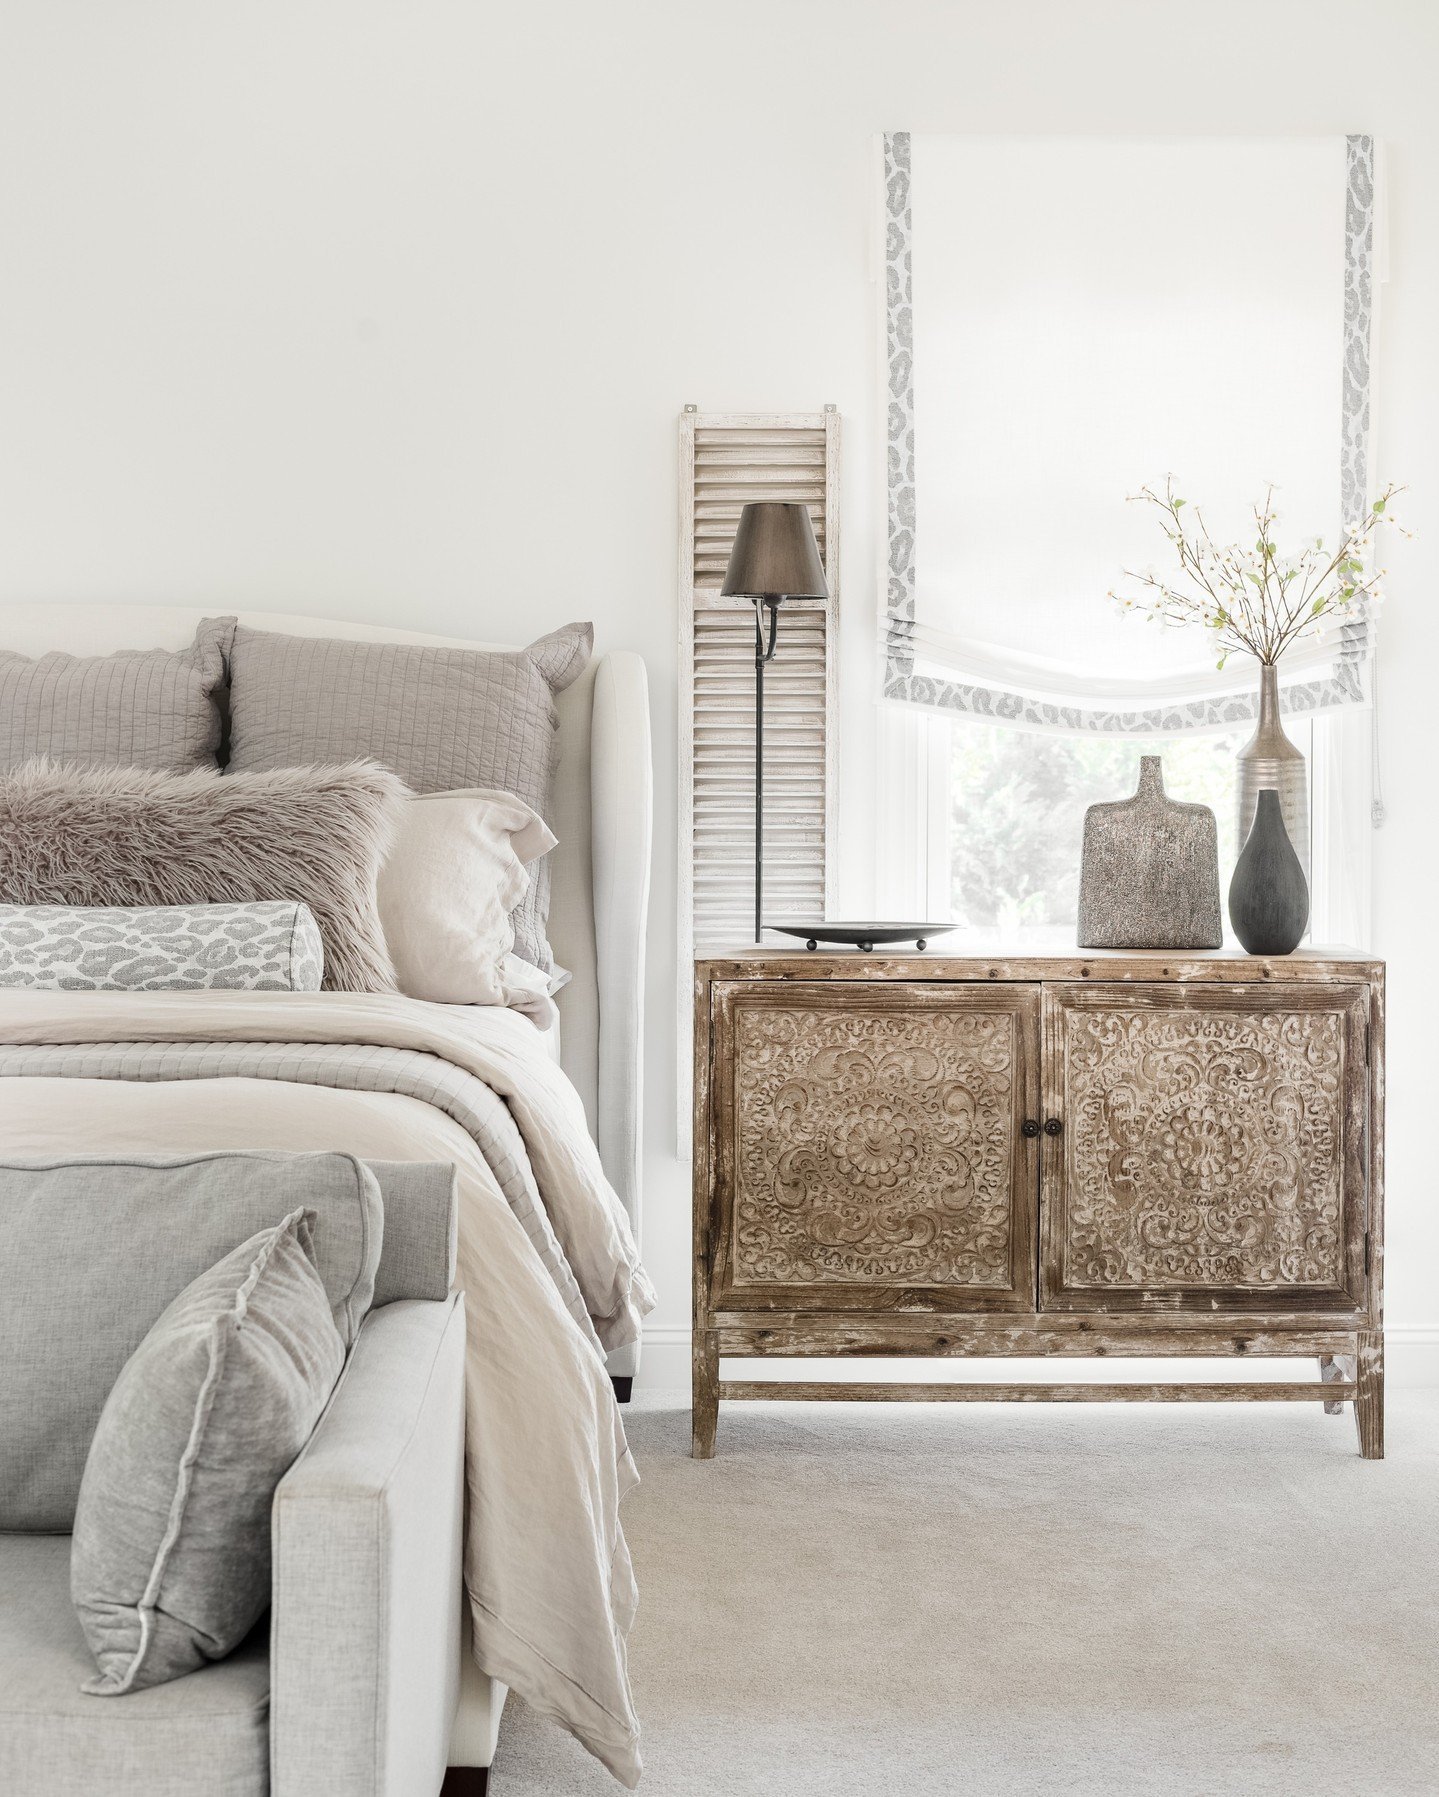 My clients&rsquo; day-to-day schedules are filled to capacity, both professionally and personally. That&rsquo;s why the true value of a tranquil bedroom retreat is paramount to enhance their well-being. 

Not only do my bedroom sanctuaries feature de